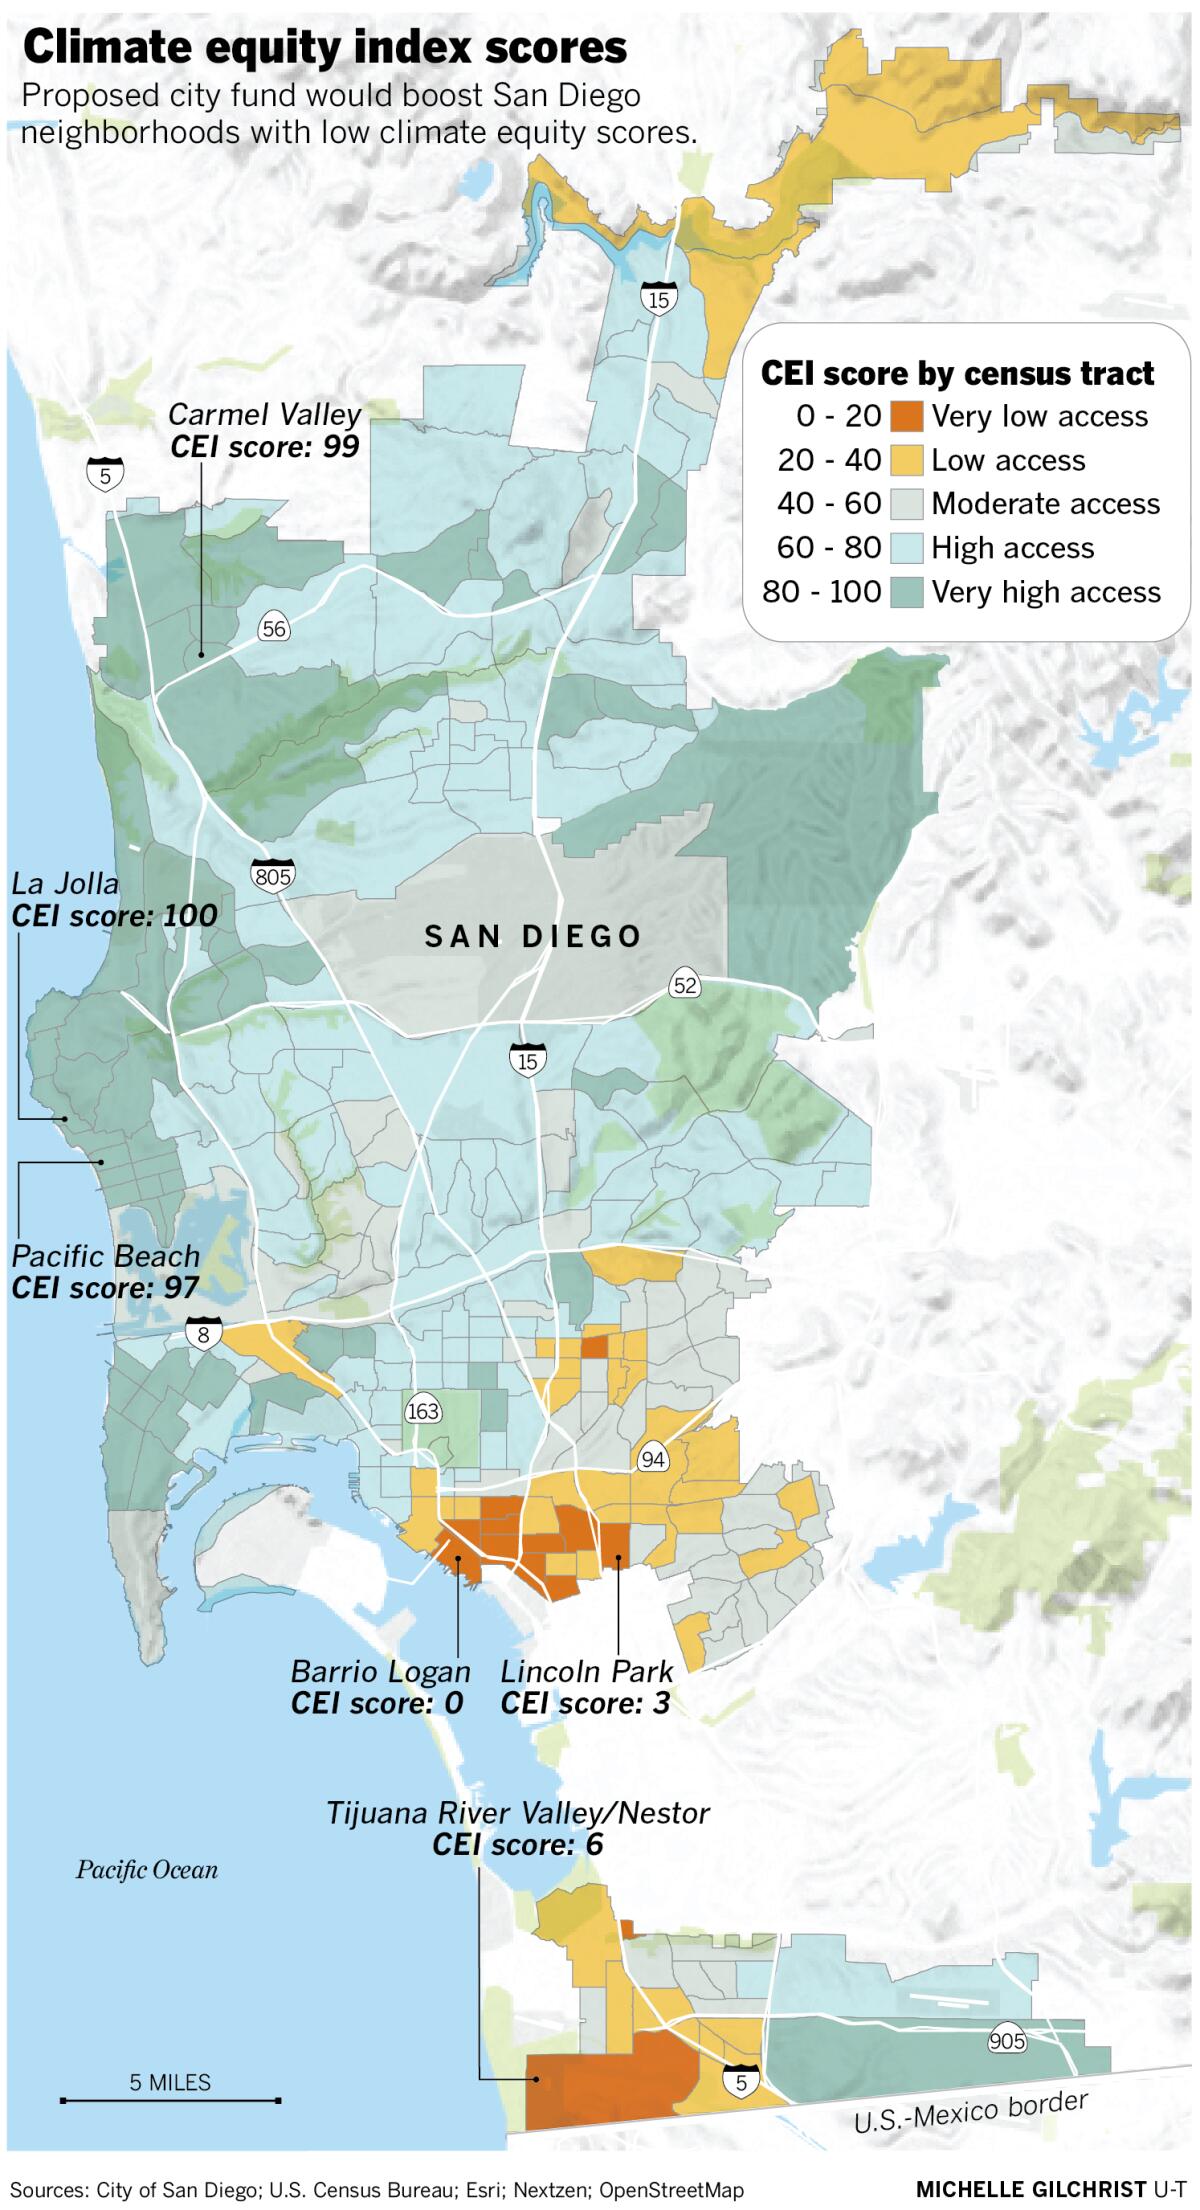 Proposed city fund would boost San Diego neighborhoods with low climate equity scores.